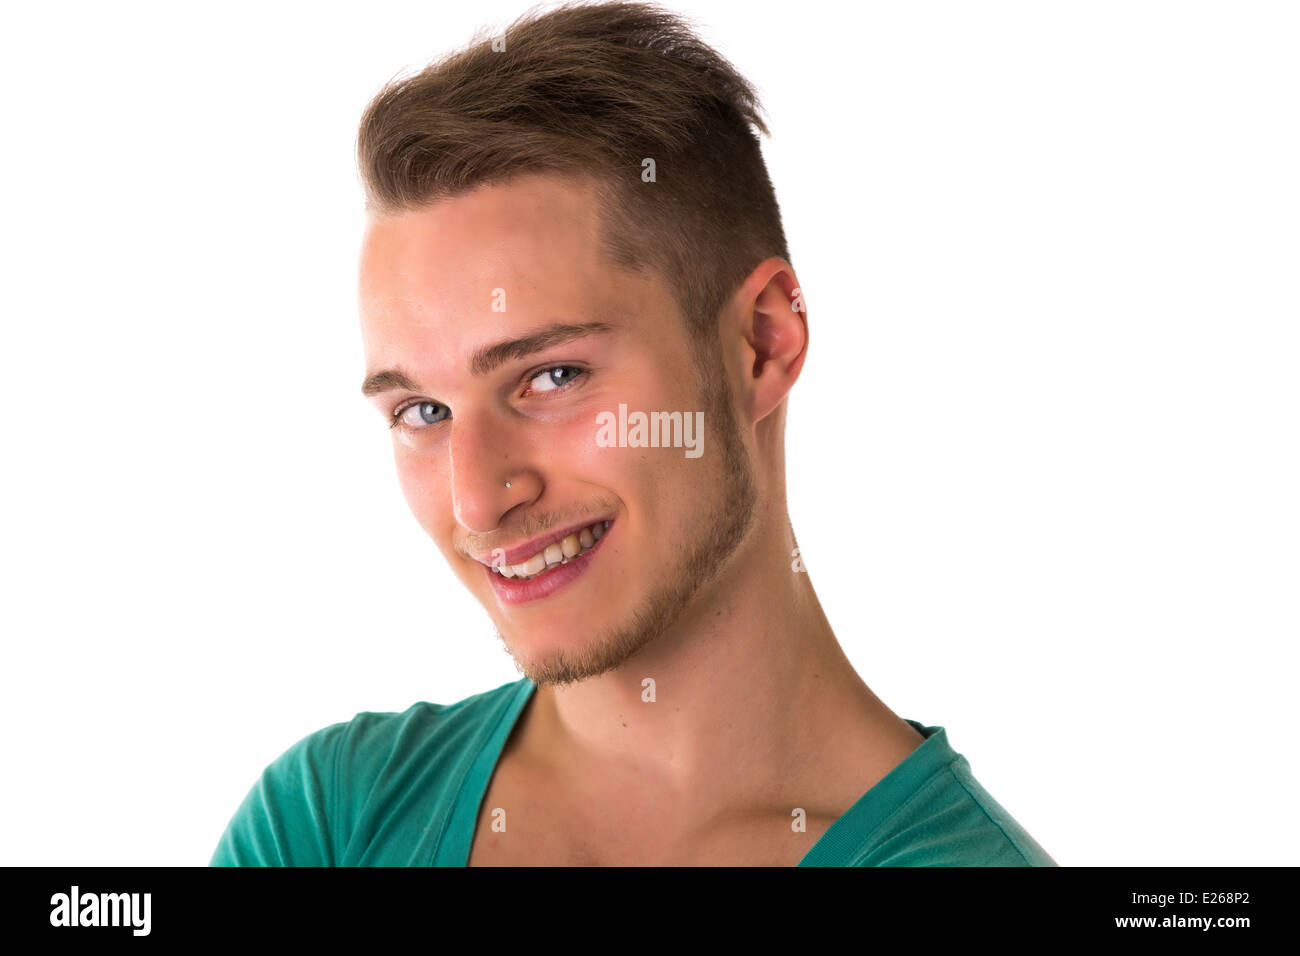 Attractive blond, blue eyed young man smiling and looking at camera, isolated Stock Photo